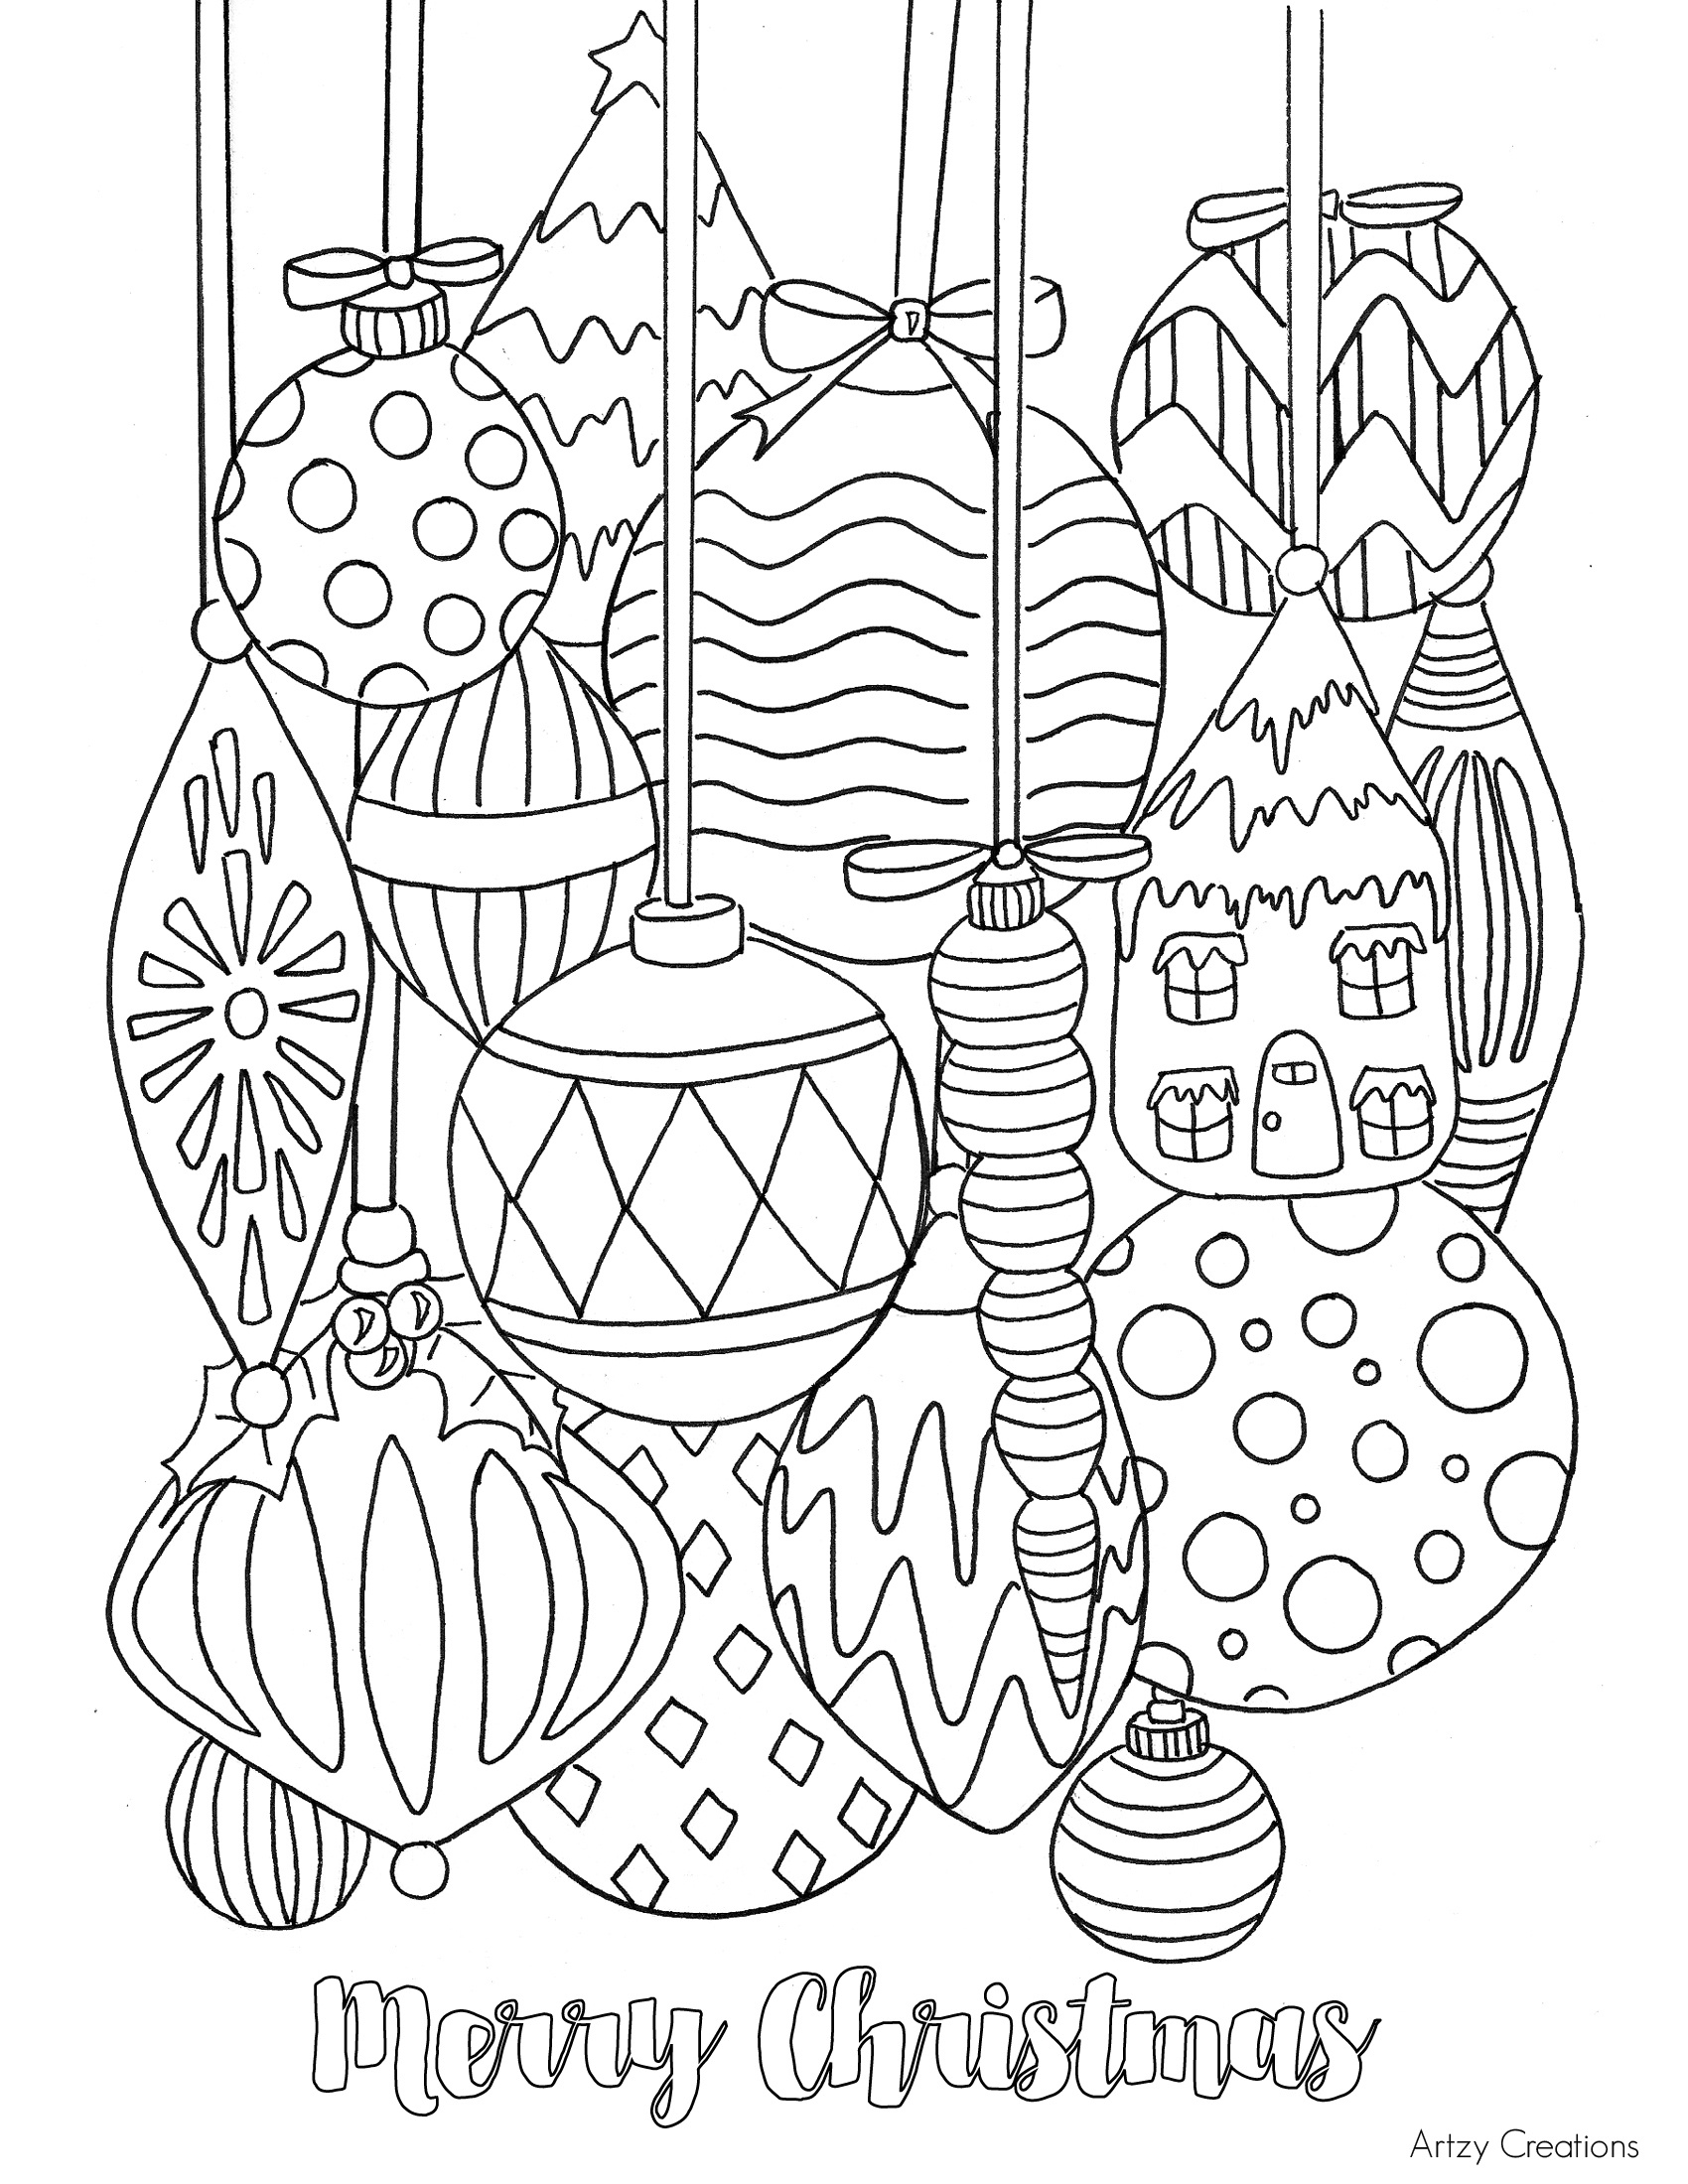 Free Christmas Ornament Coloring Page - Tgif - This Grandma Is Fun - Free Printable Christmas Ornament Coloring Pages